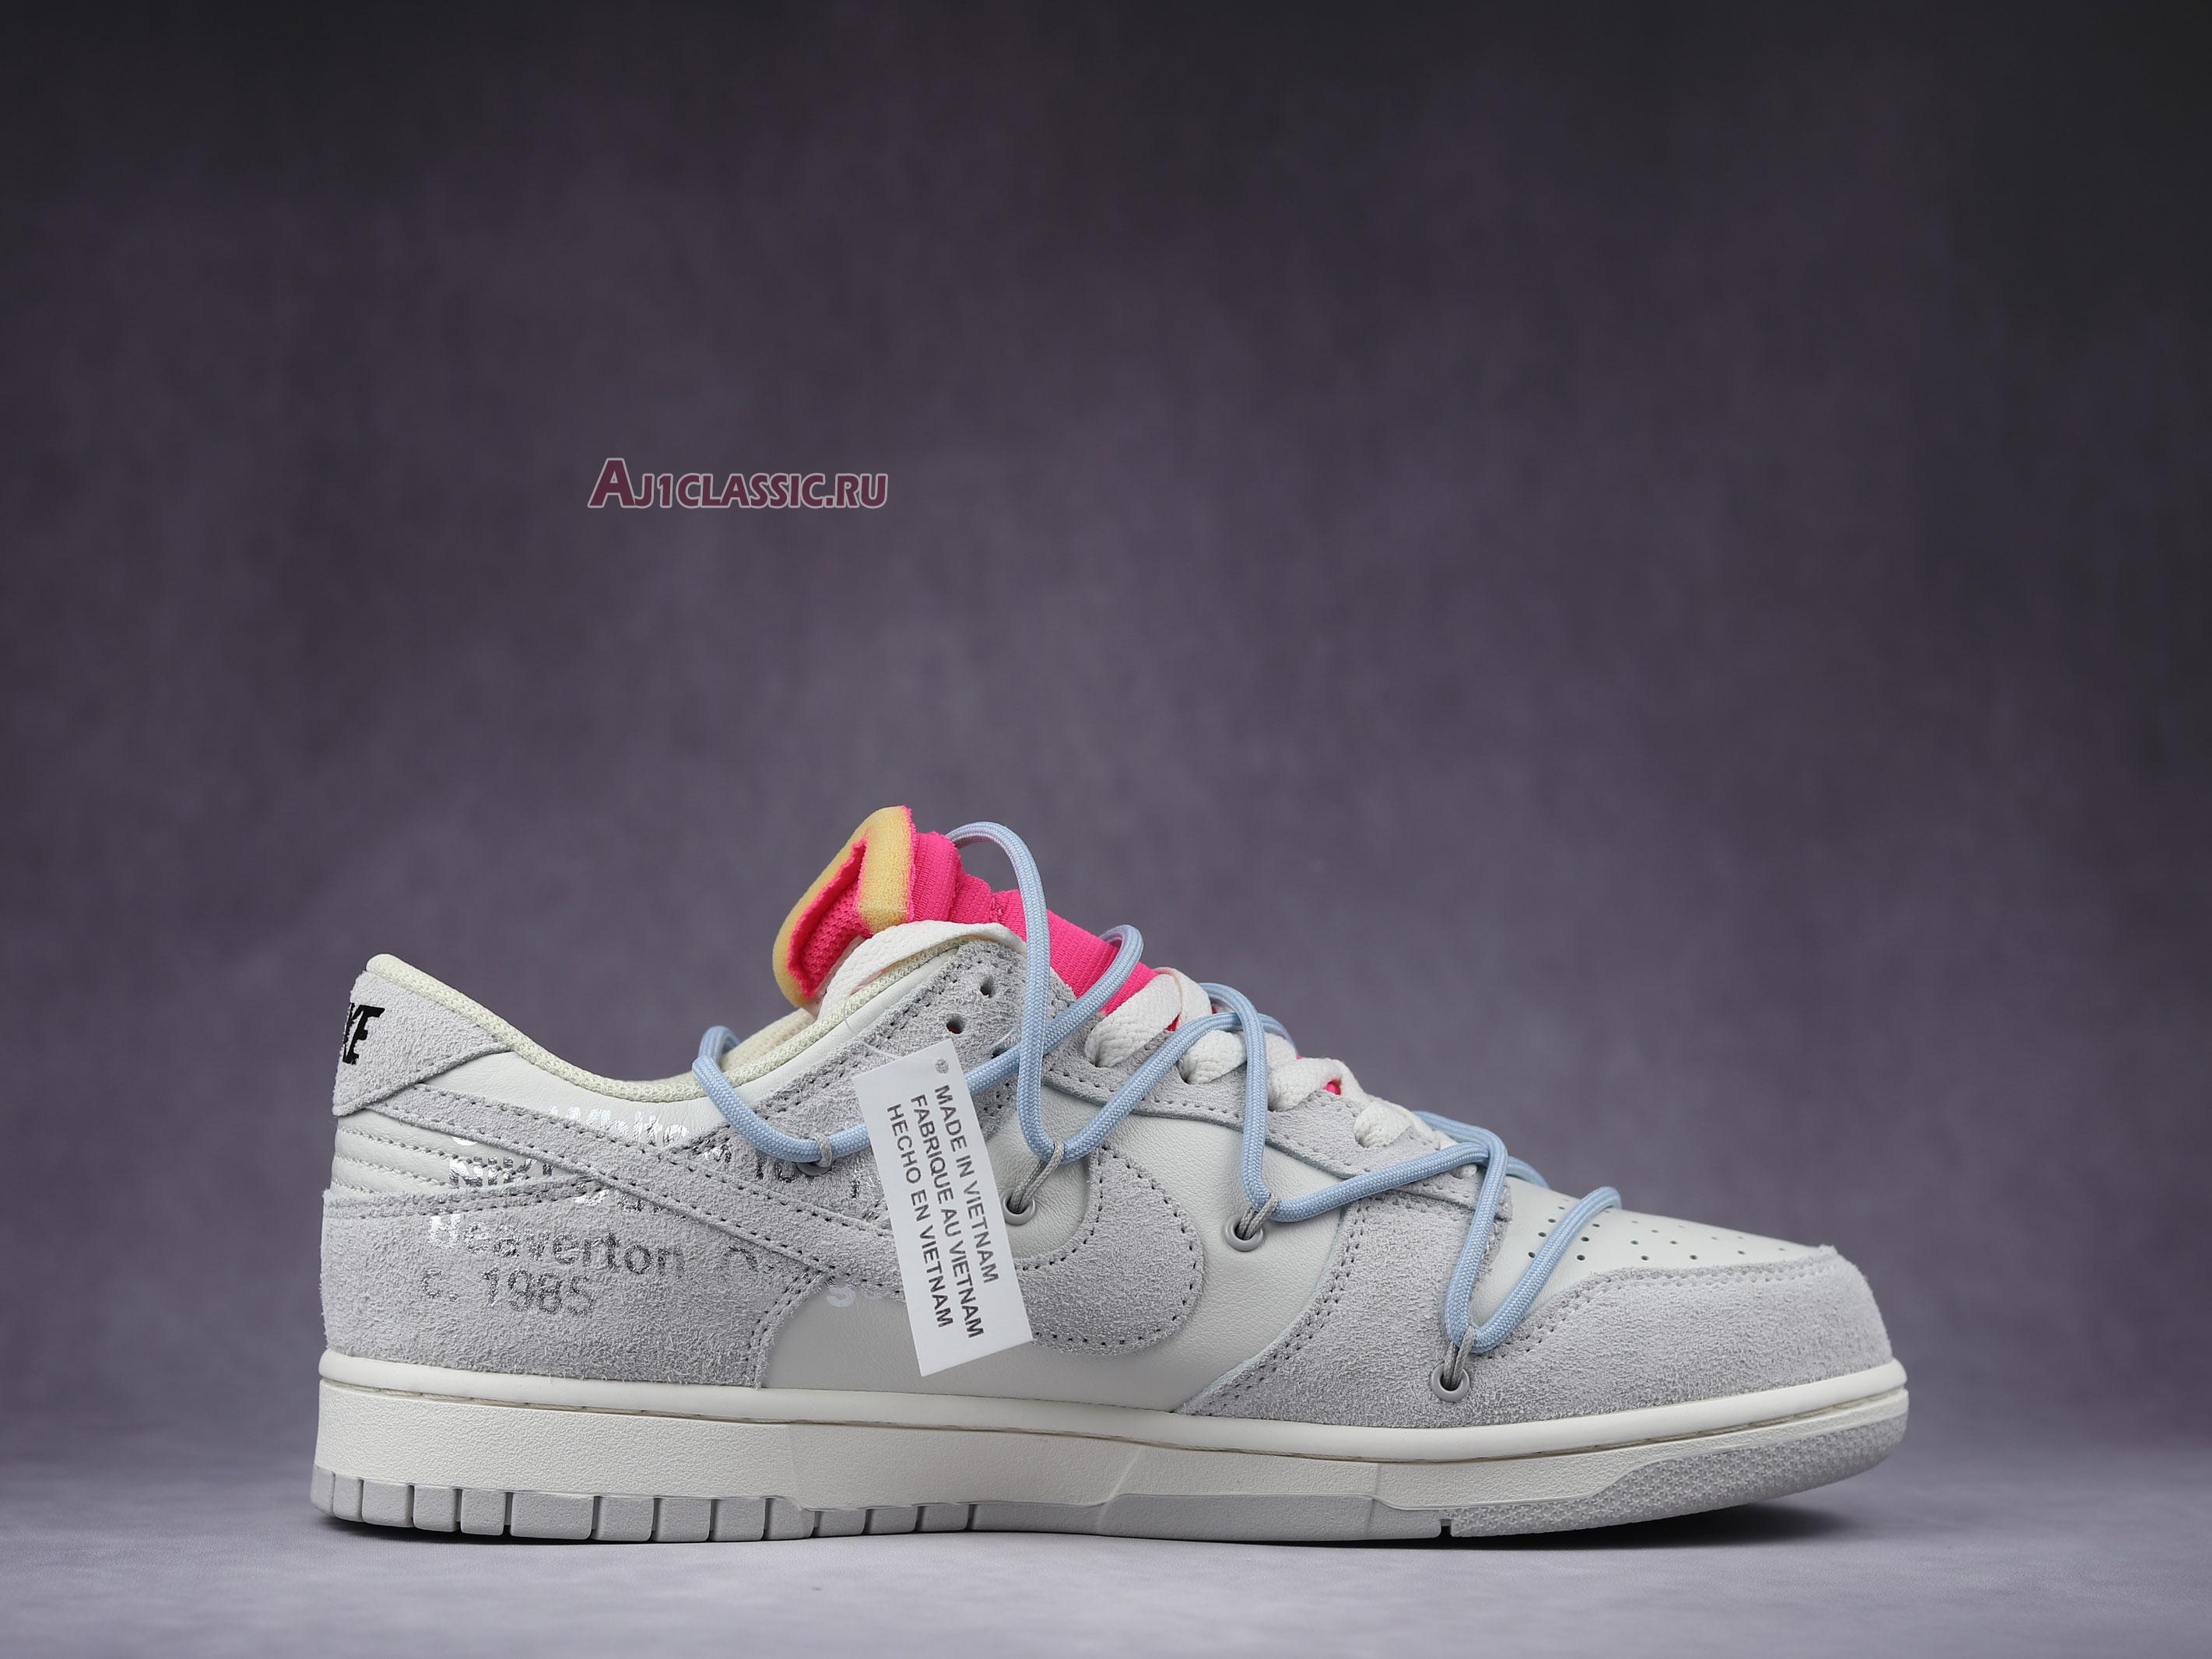 Off-White x Nike Dunk Low "Lot 38 of 50" DJ0950-113